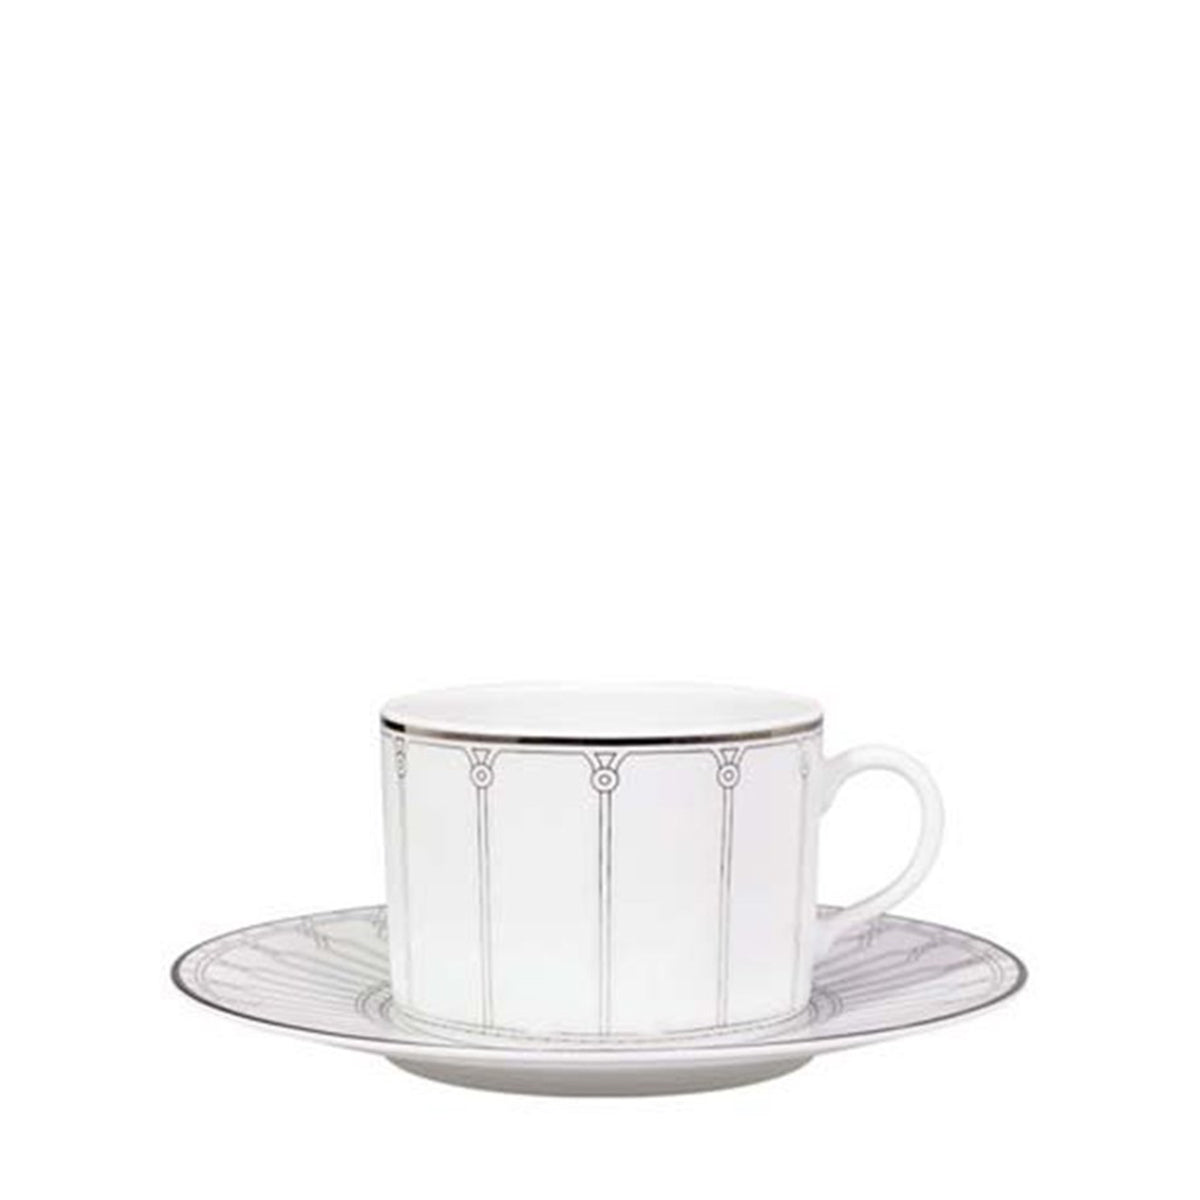 ALLEGRO TEA CUP AND SAUCER 23CL